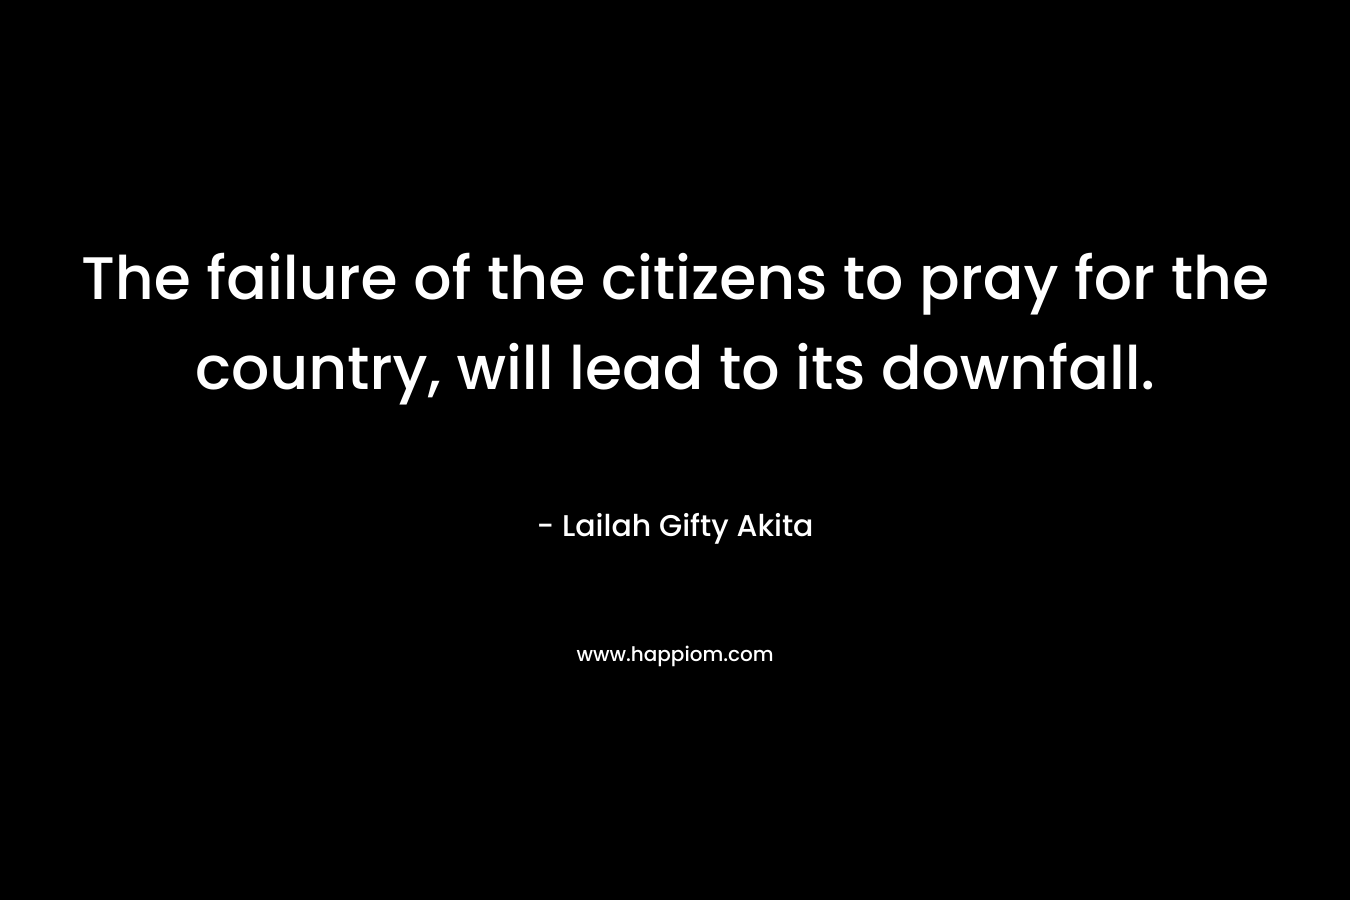 The failure of the citizens to pray for the country, will lead to its downfall.